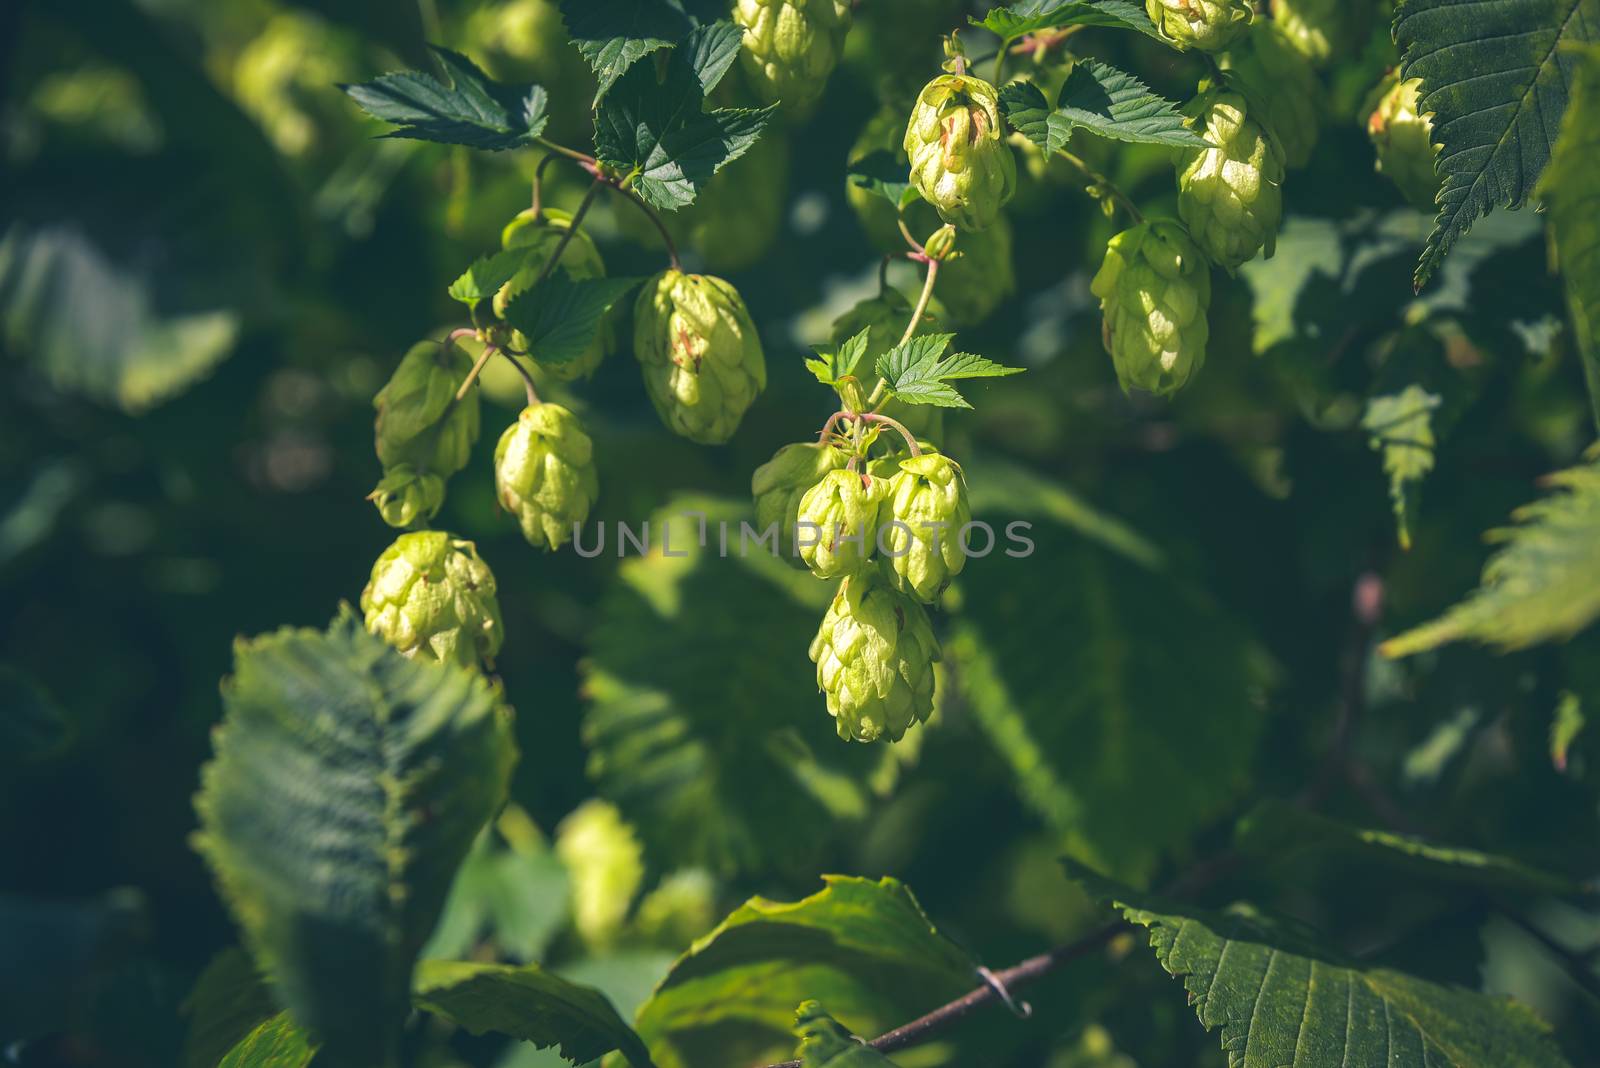 Hop farm with organic hops growing on a vine ready for harvest.